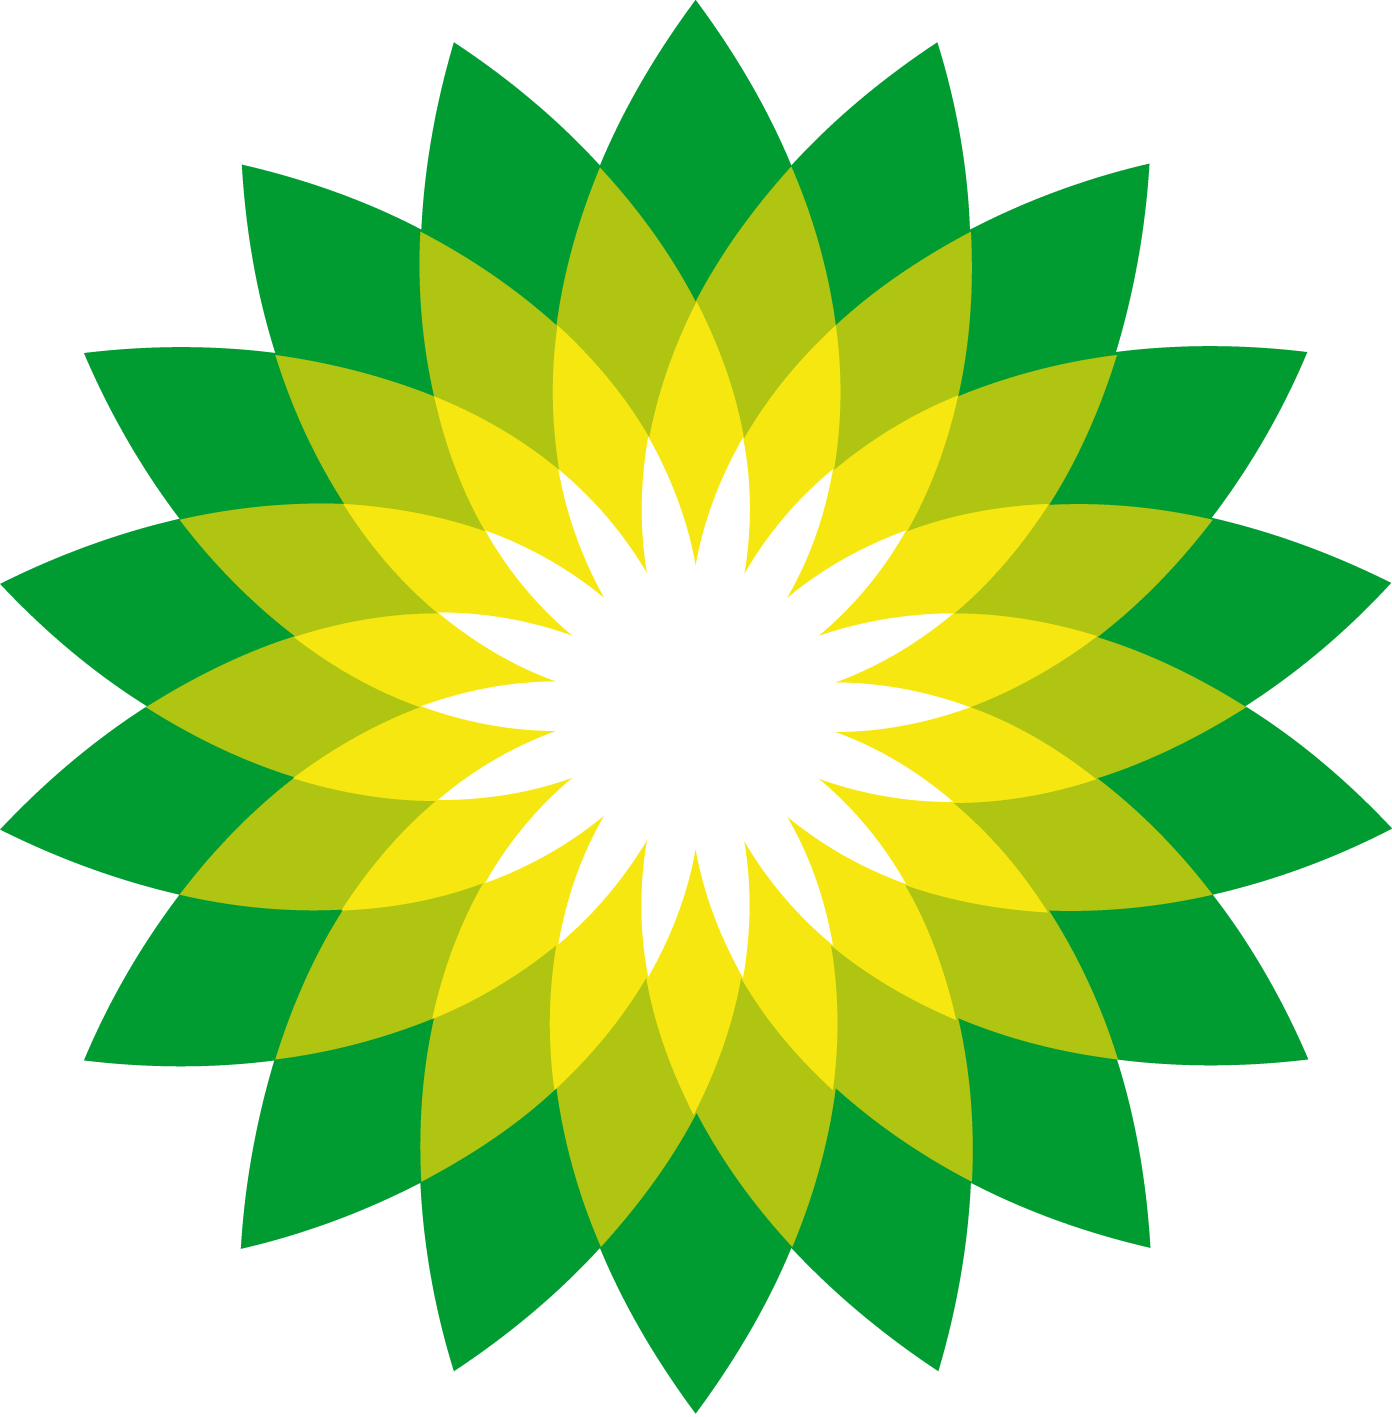 Green and Yellow Flower Logo - BP mission statement 2013 Management Insight